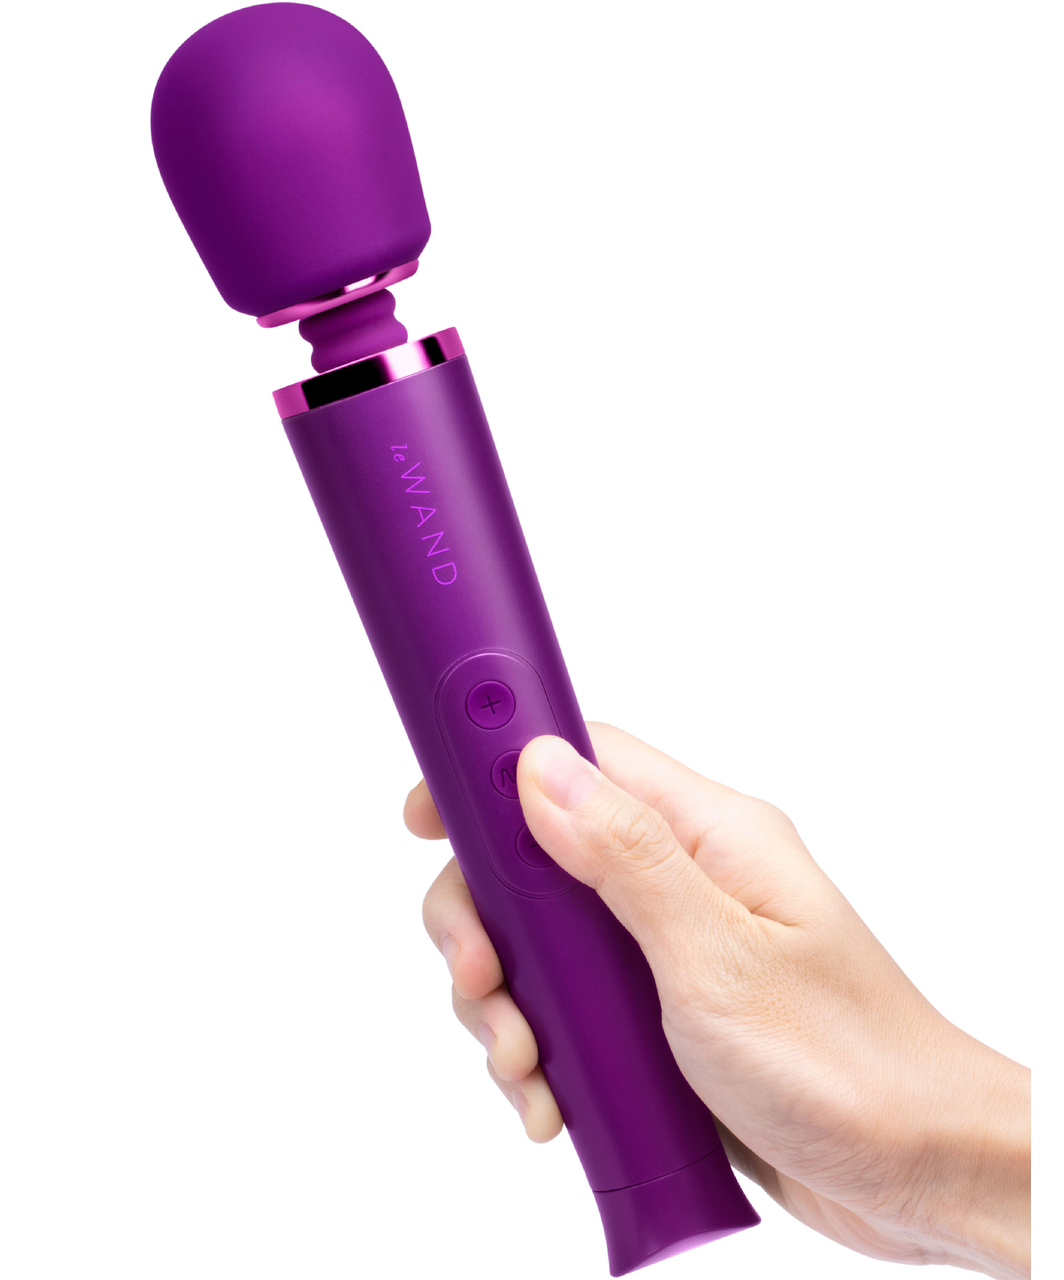 Le Wand Petite Cherry Rechargeable Vibrating Massager